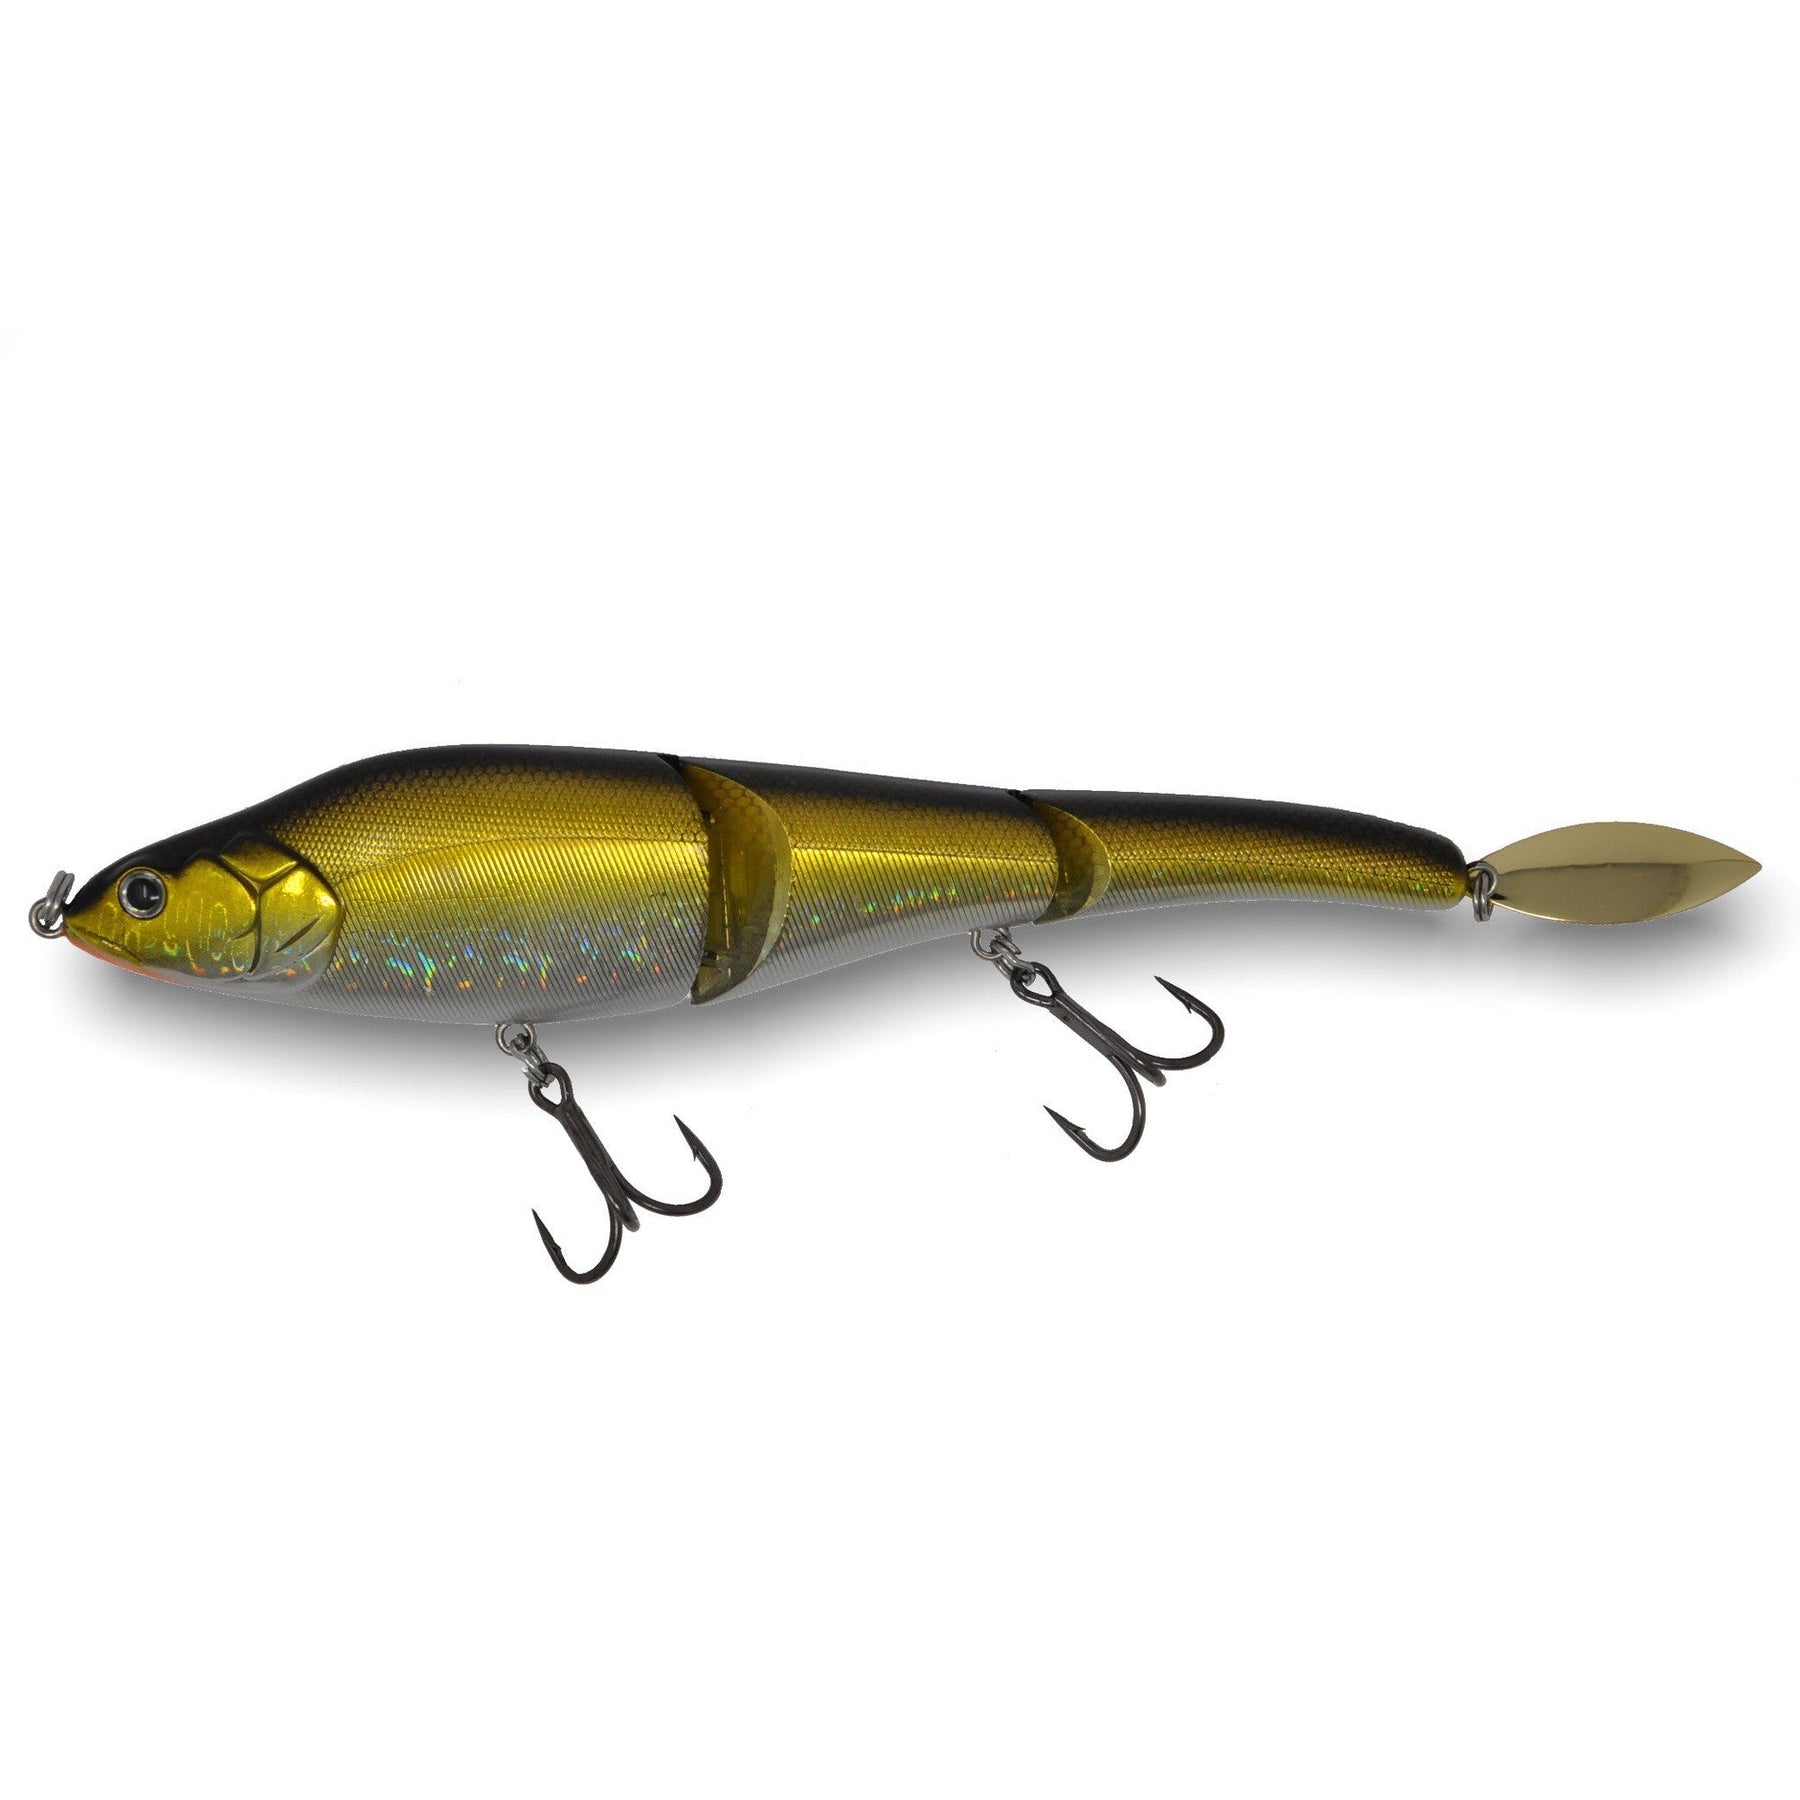 View of Berkley Sébile Magic Swimmer 228 Slow Sinking Golden Shiner available at EZOKO Pike and Musky Shop